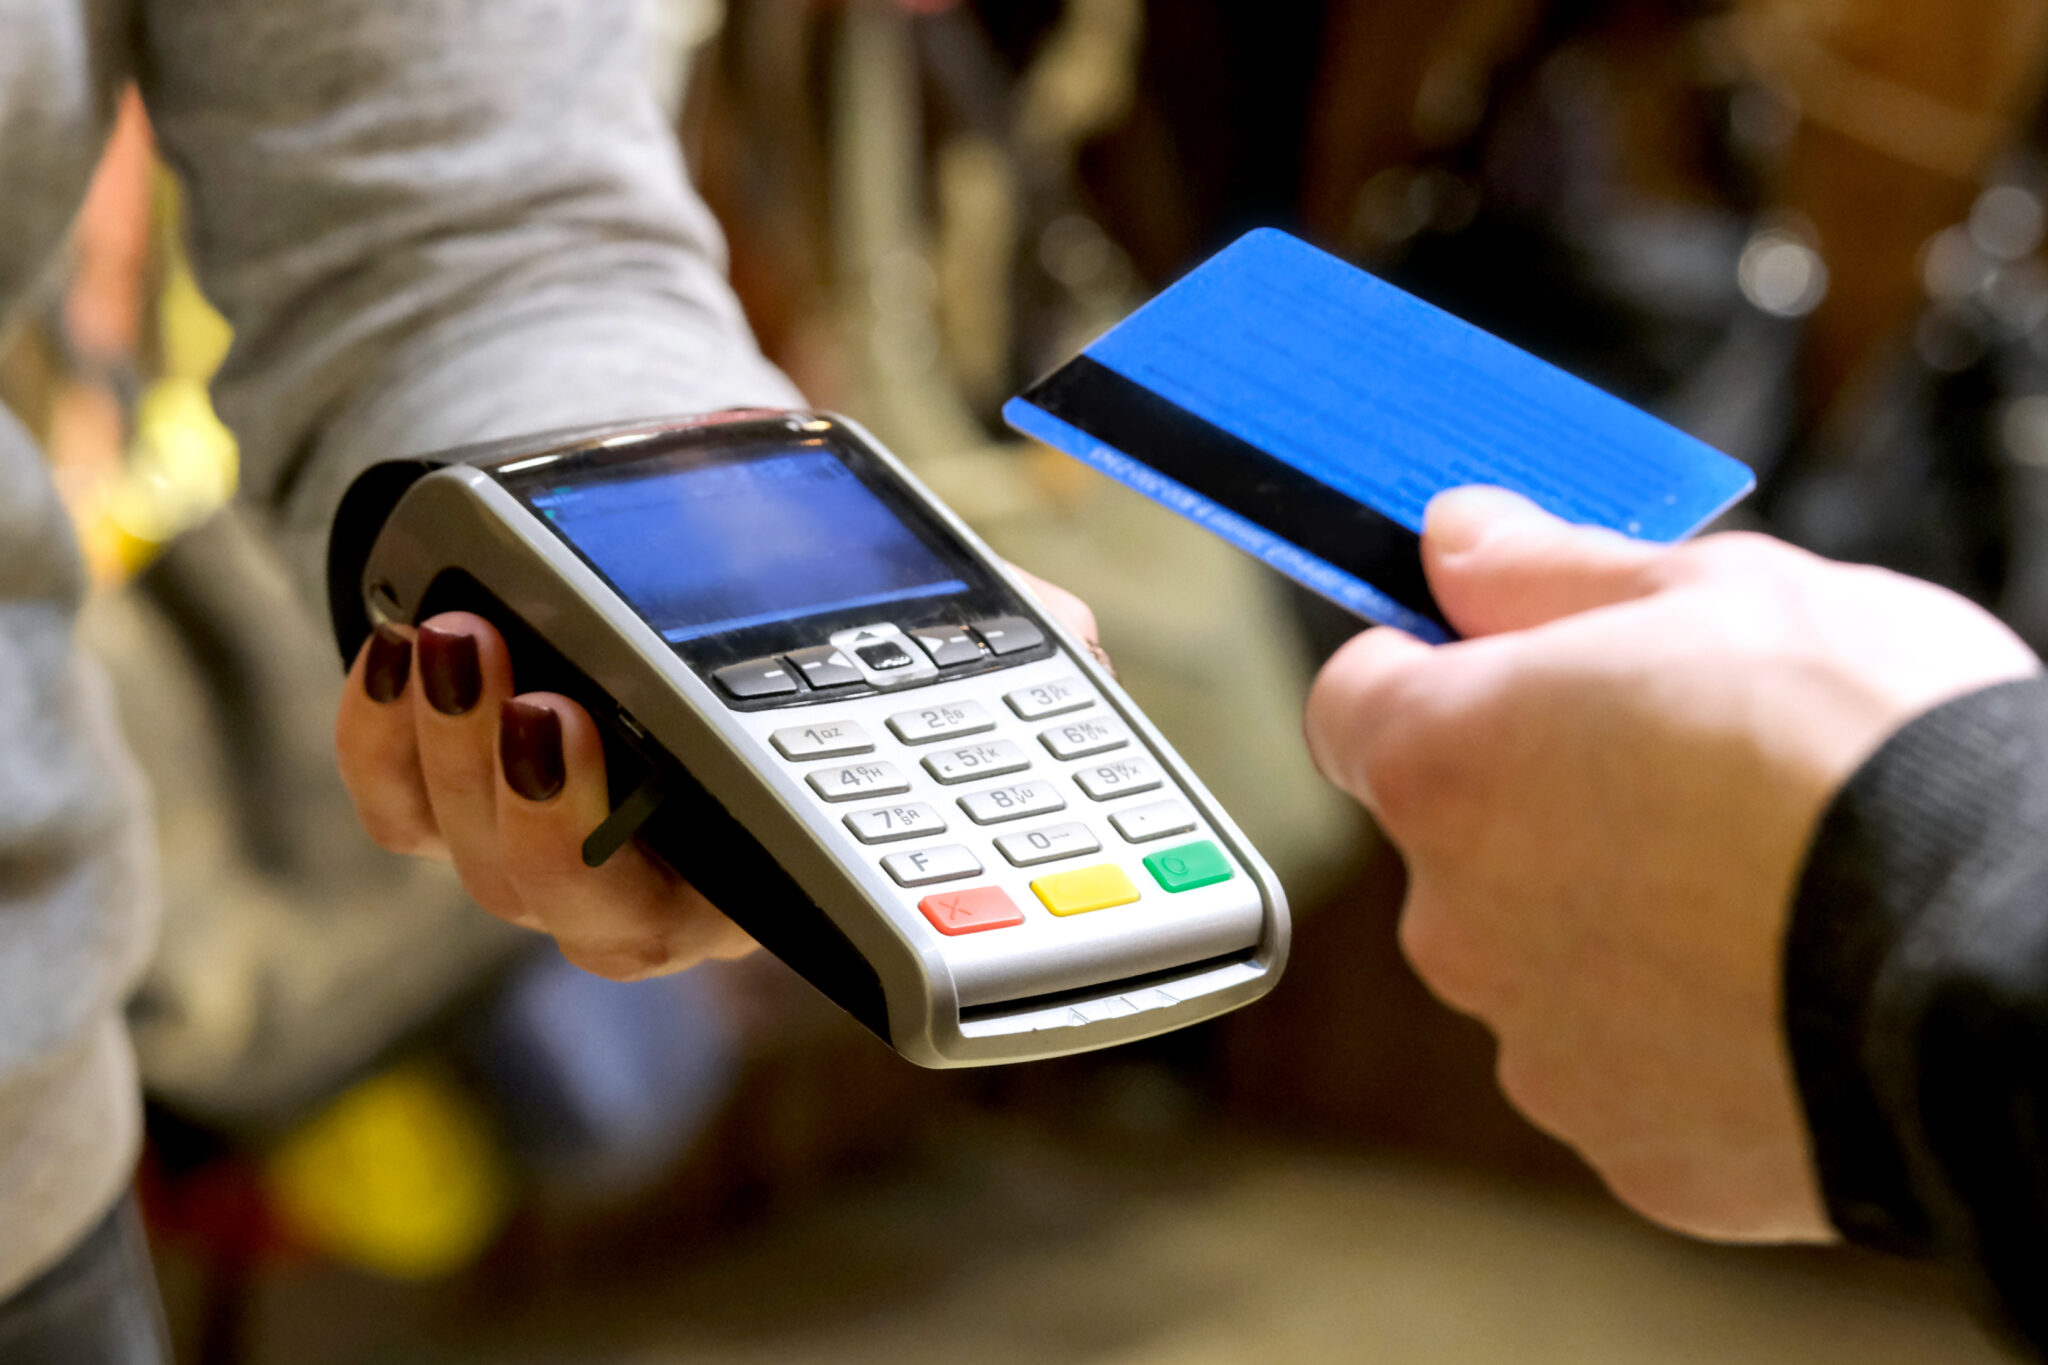 Turning a digital payments pioneer into a market leader